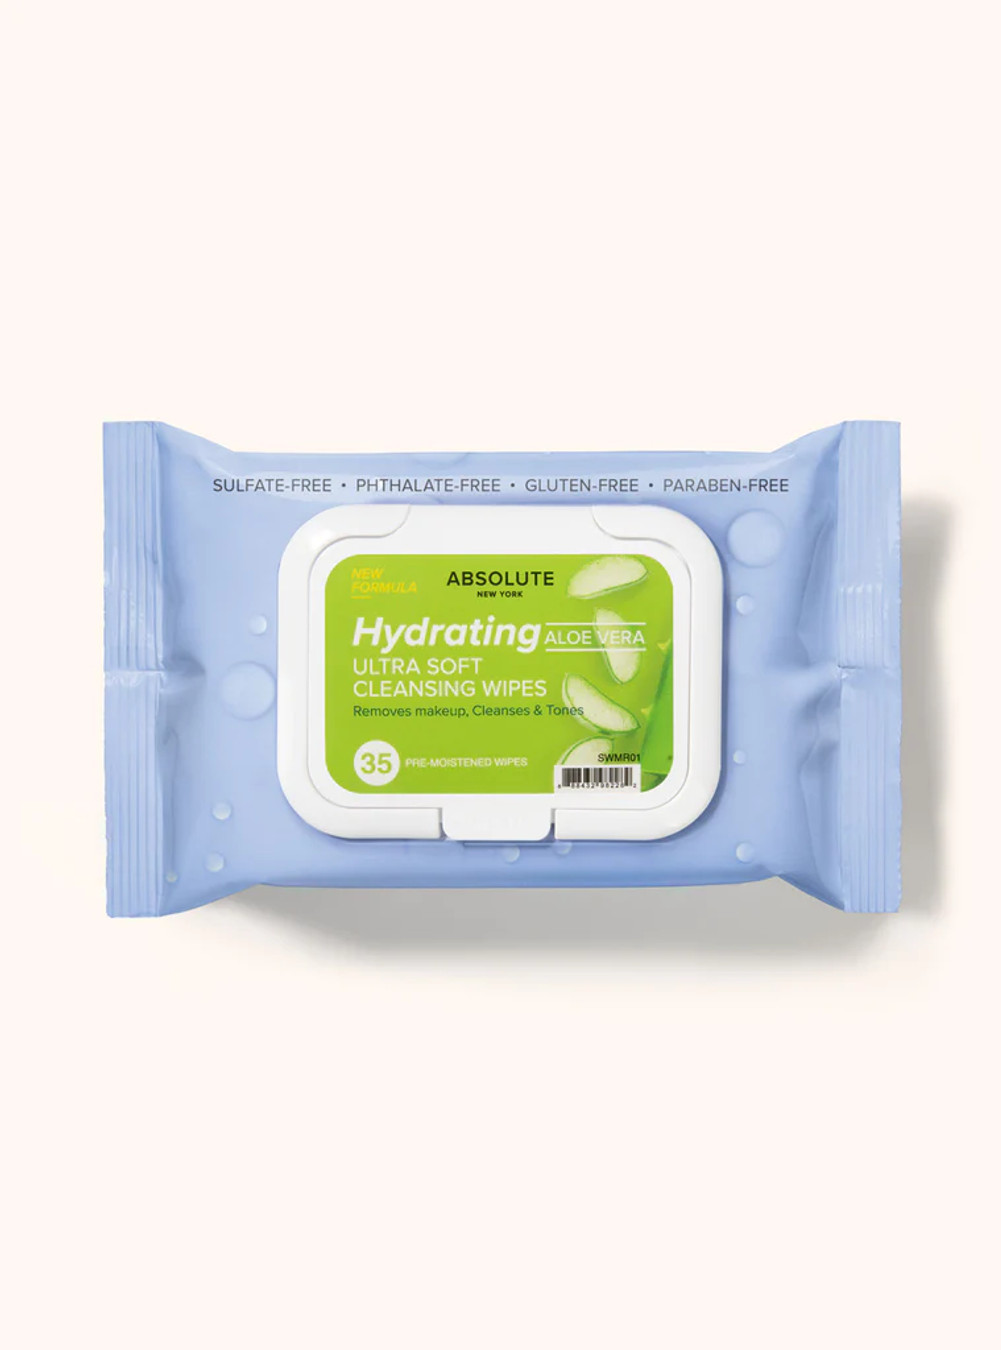 ABSOLUTE Ultra Soft Cleansing Wipes